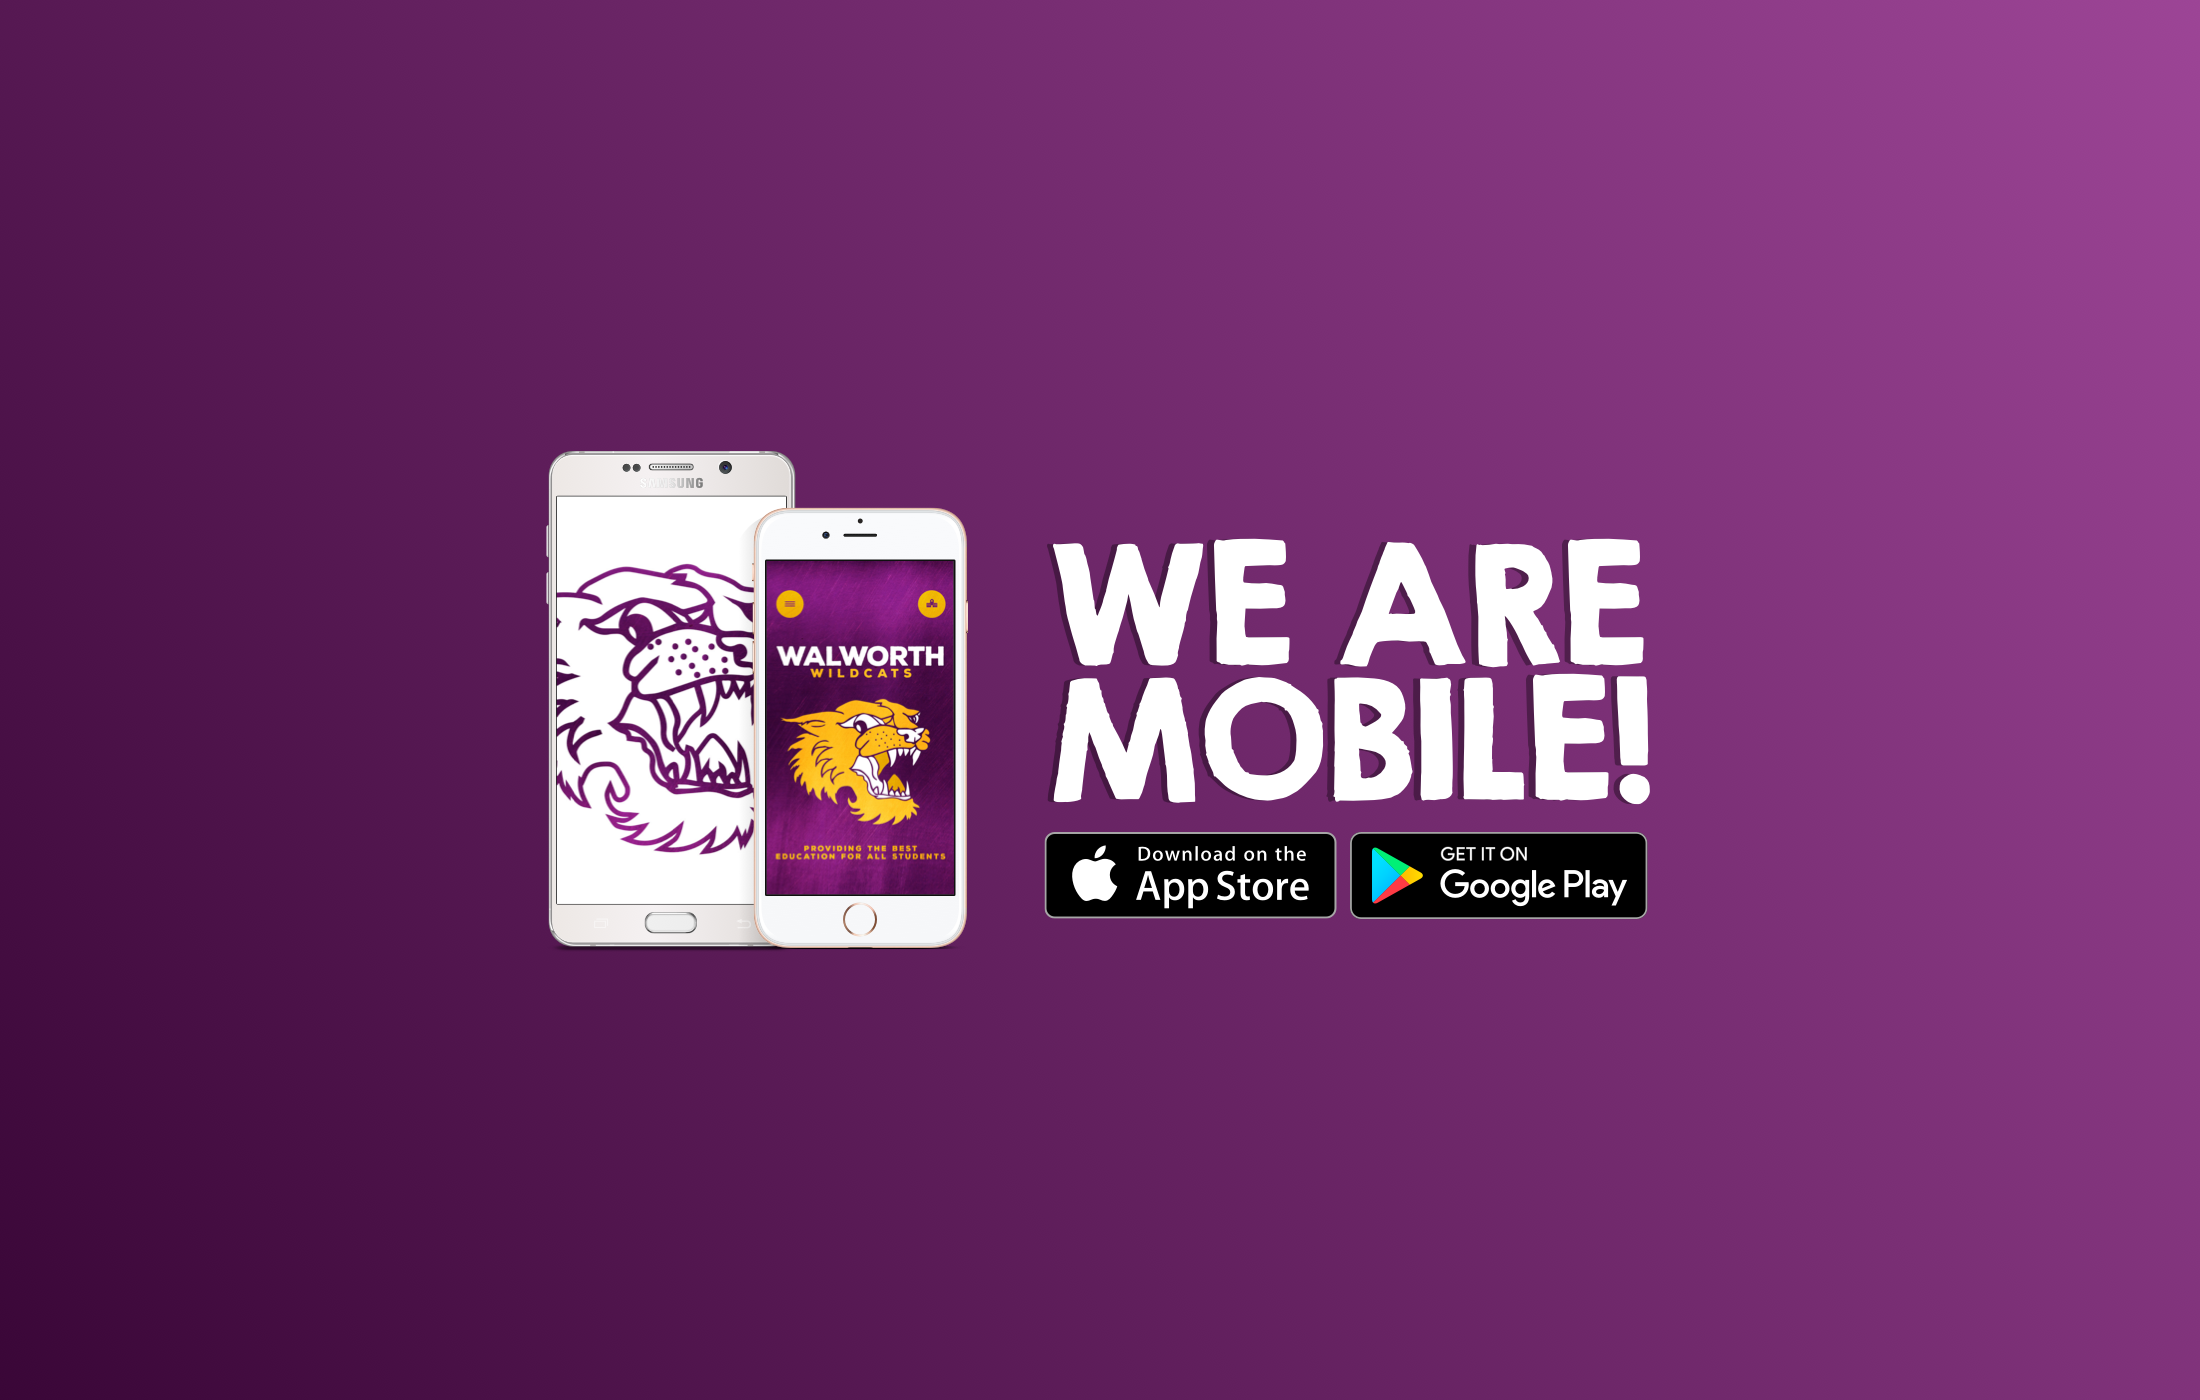 We Are Mobile Download in the App Store or Get it on Google Play